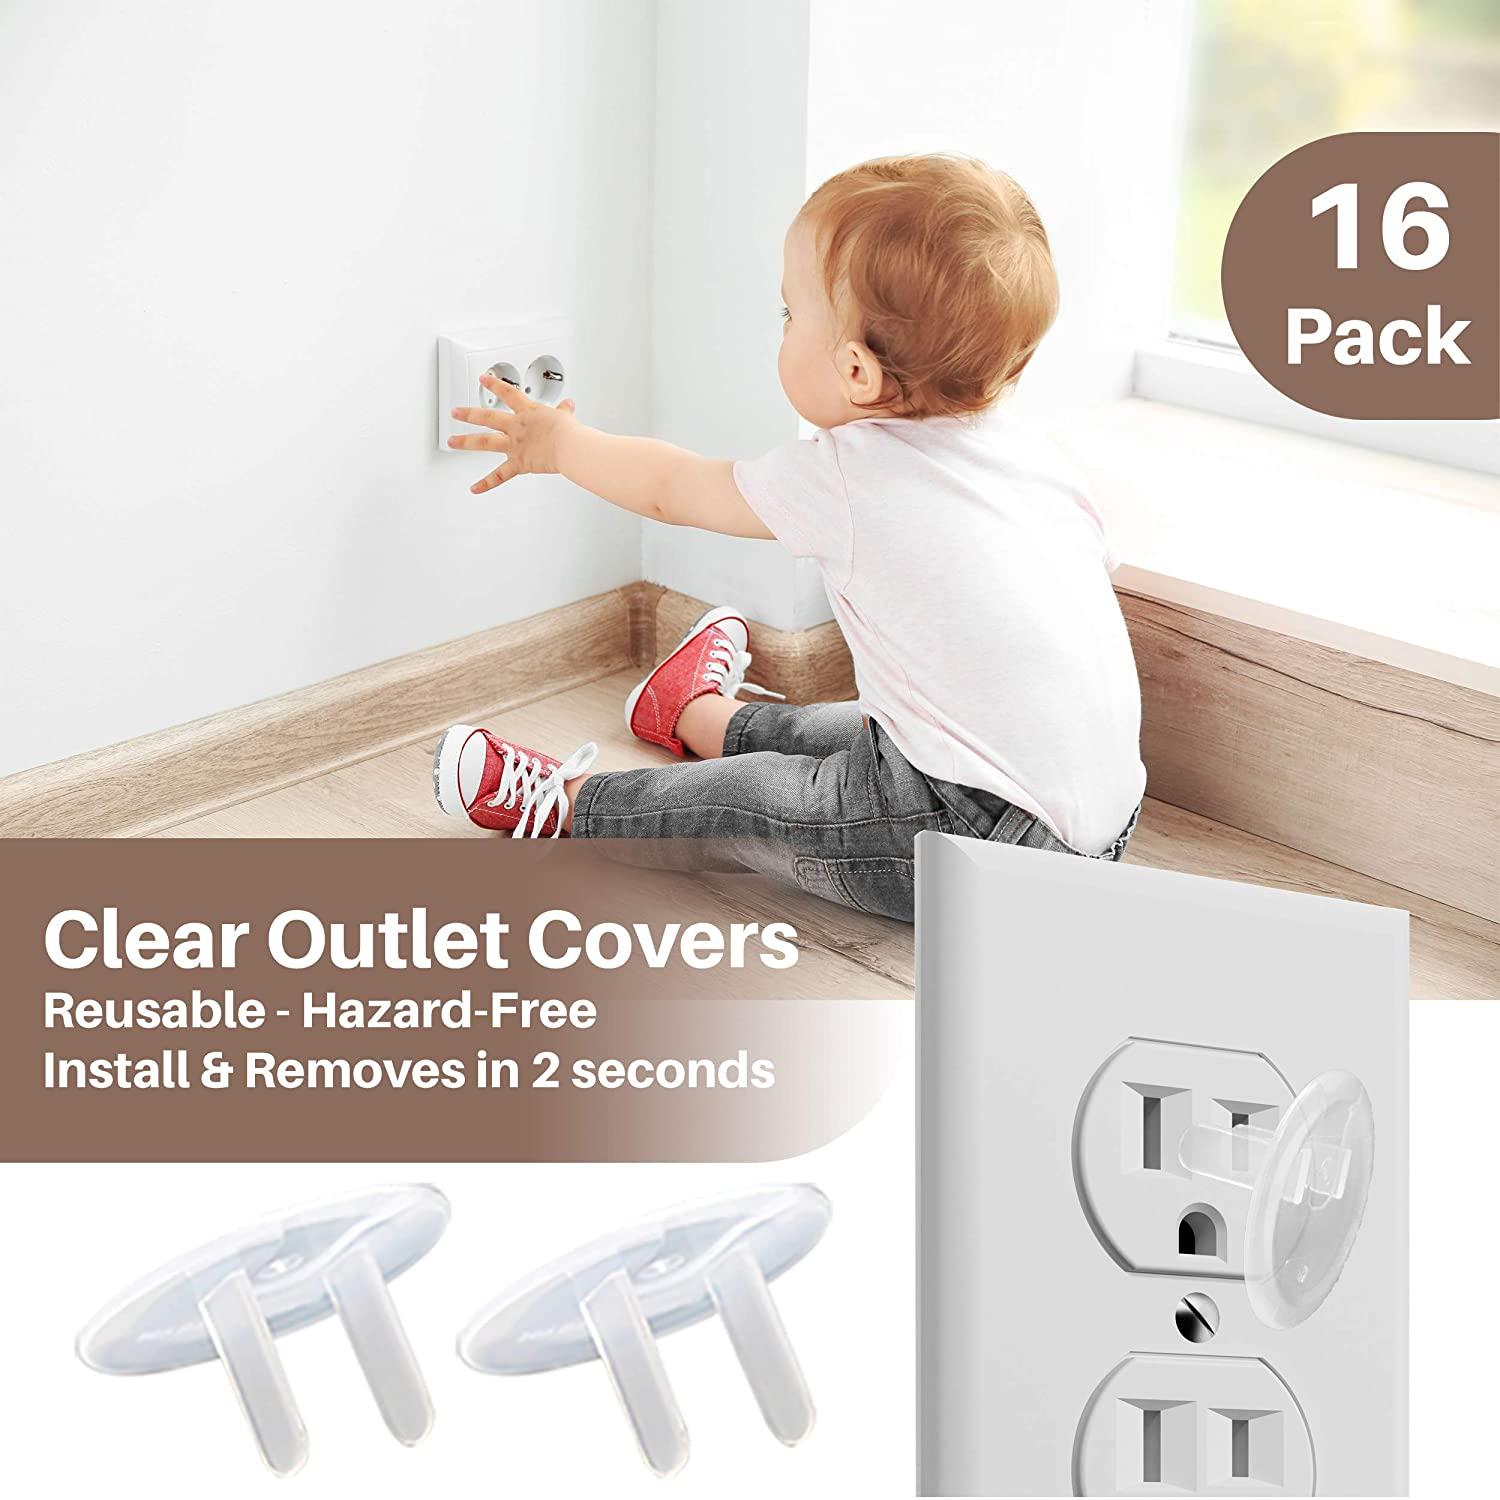 Complete Baby Proofing Kit - Child Safety Hidden Locks for